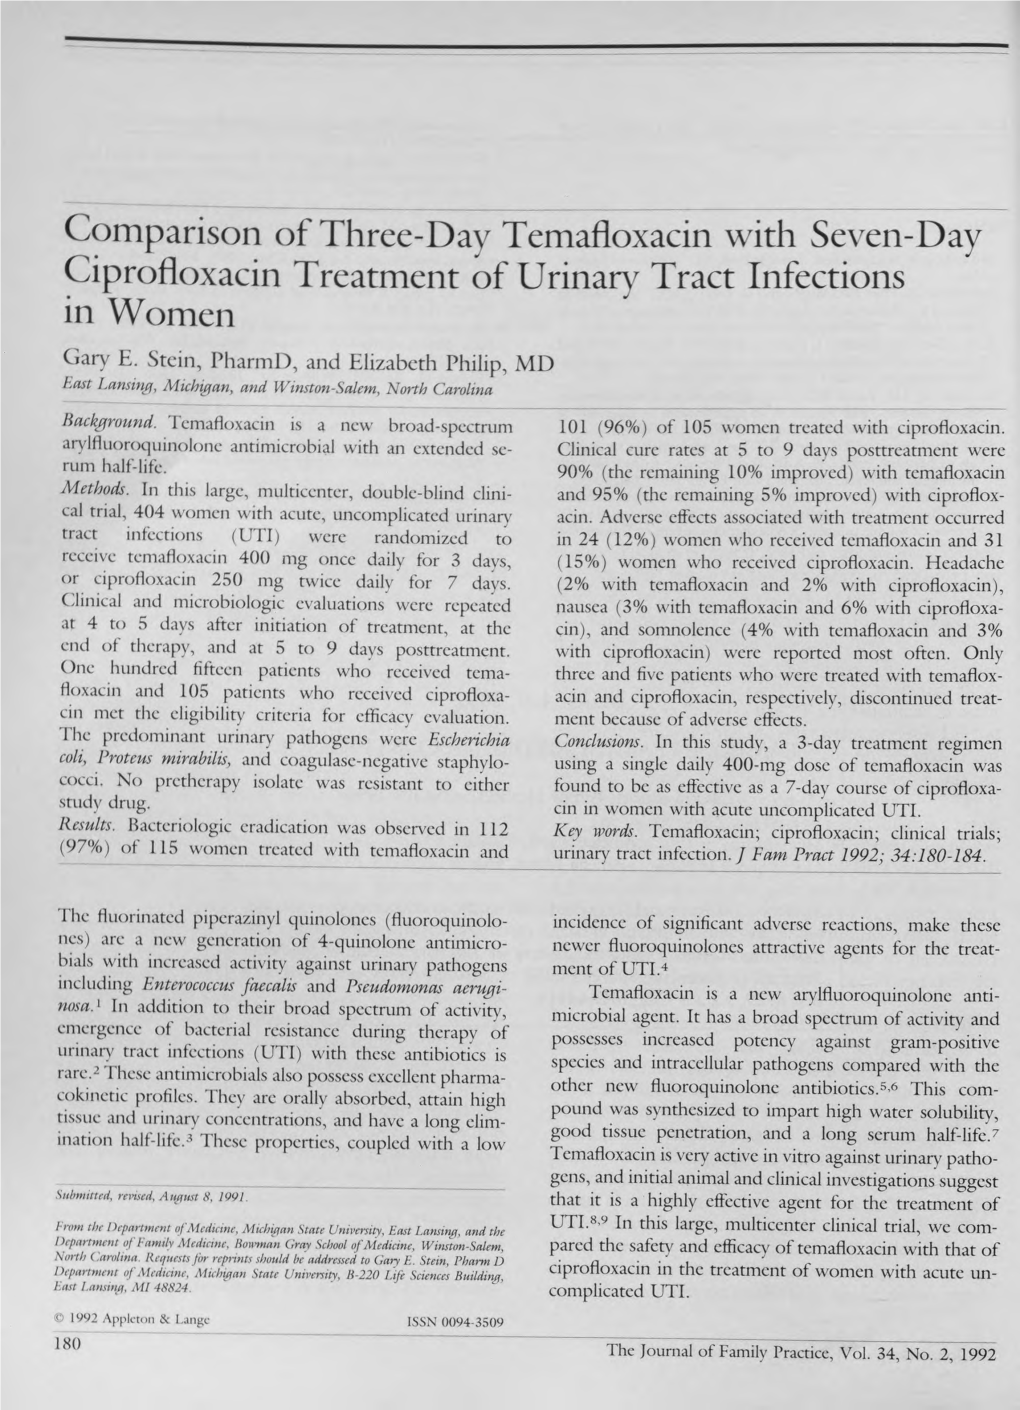 Comparison of Three-Day Temafloxacin with Seven-Day Ciprofloxacin Treatment of Urinary Tract Infections in Women Gary E